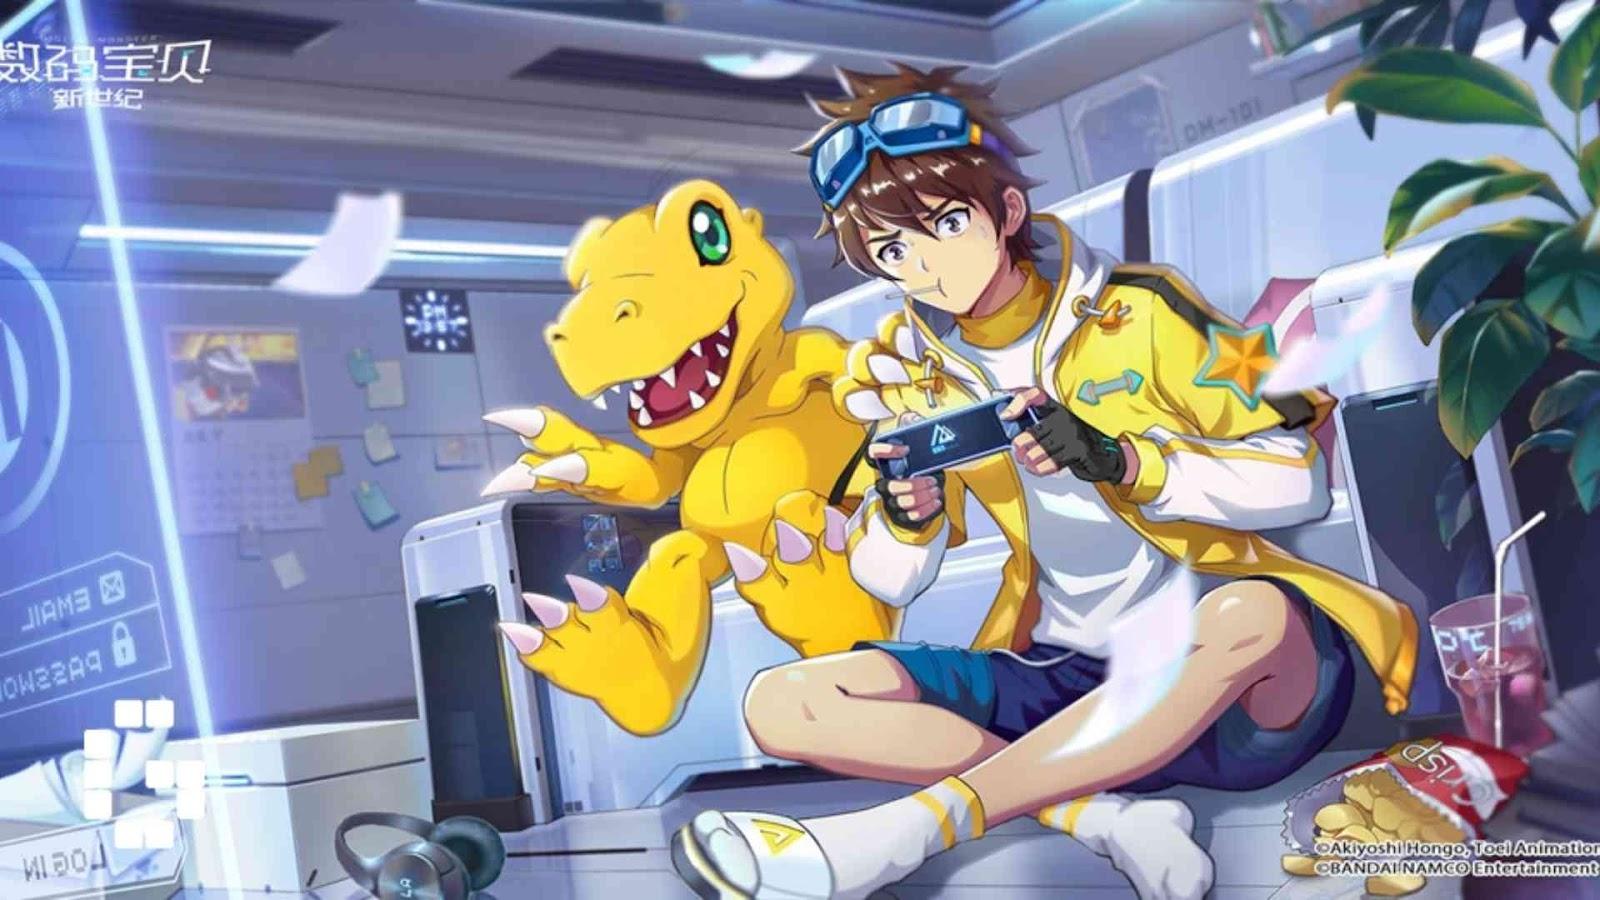 Best Digimon games of all time: from Rumble to World - Dexerto